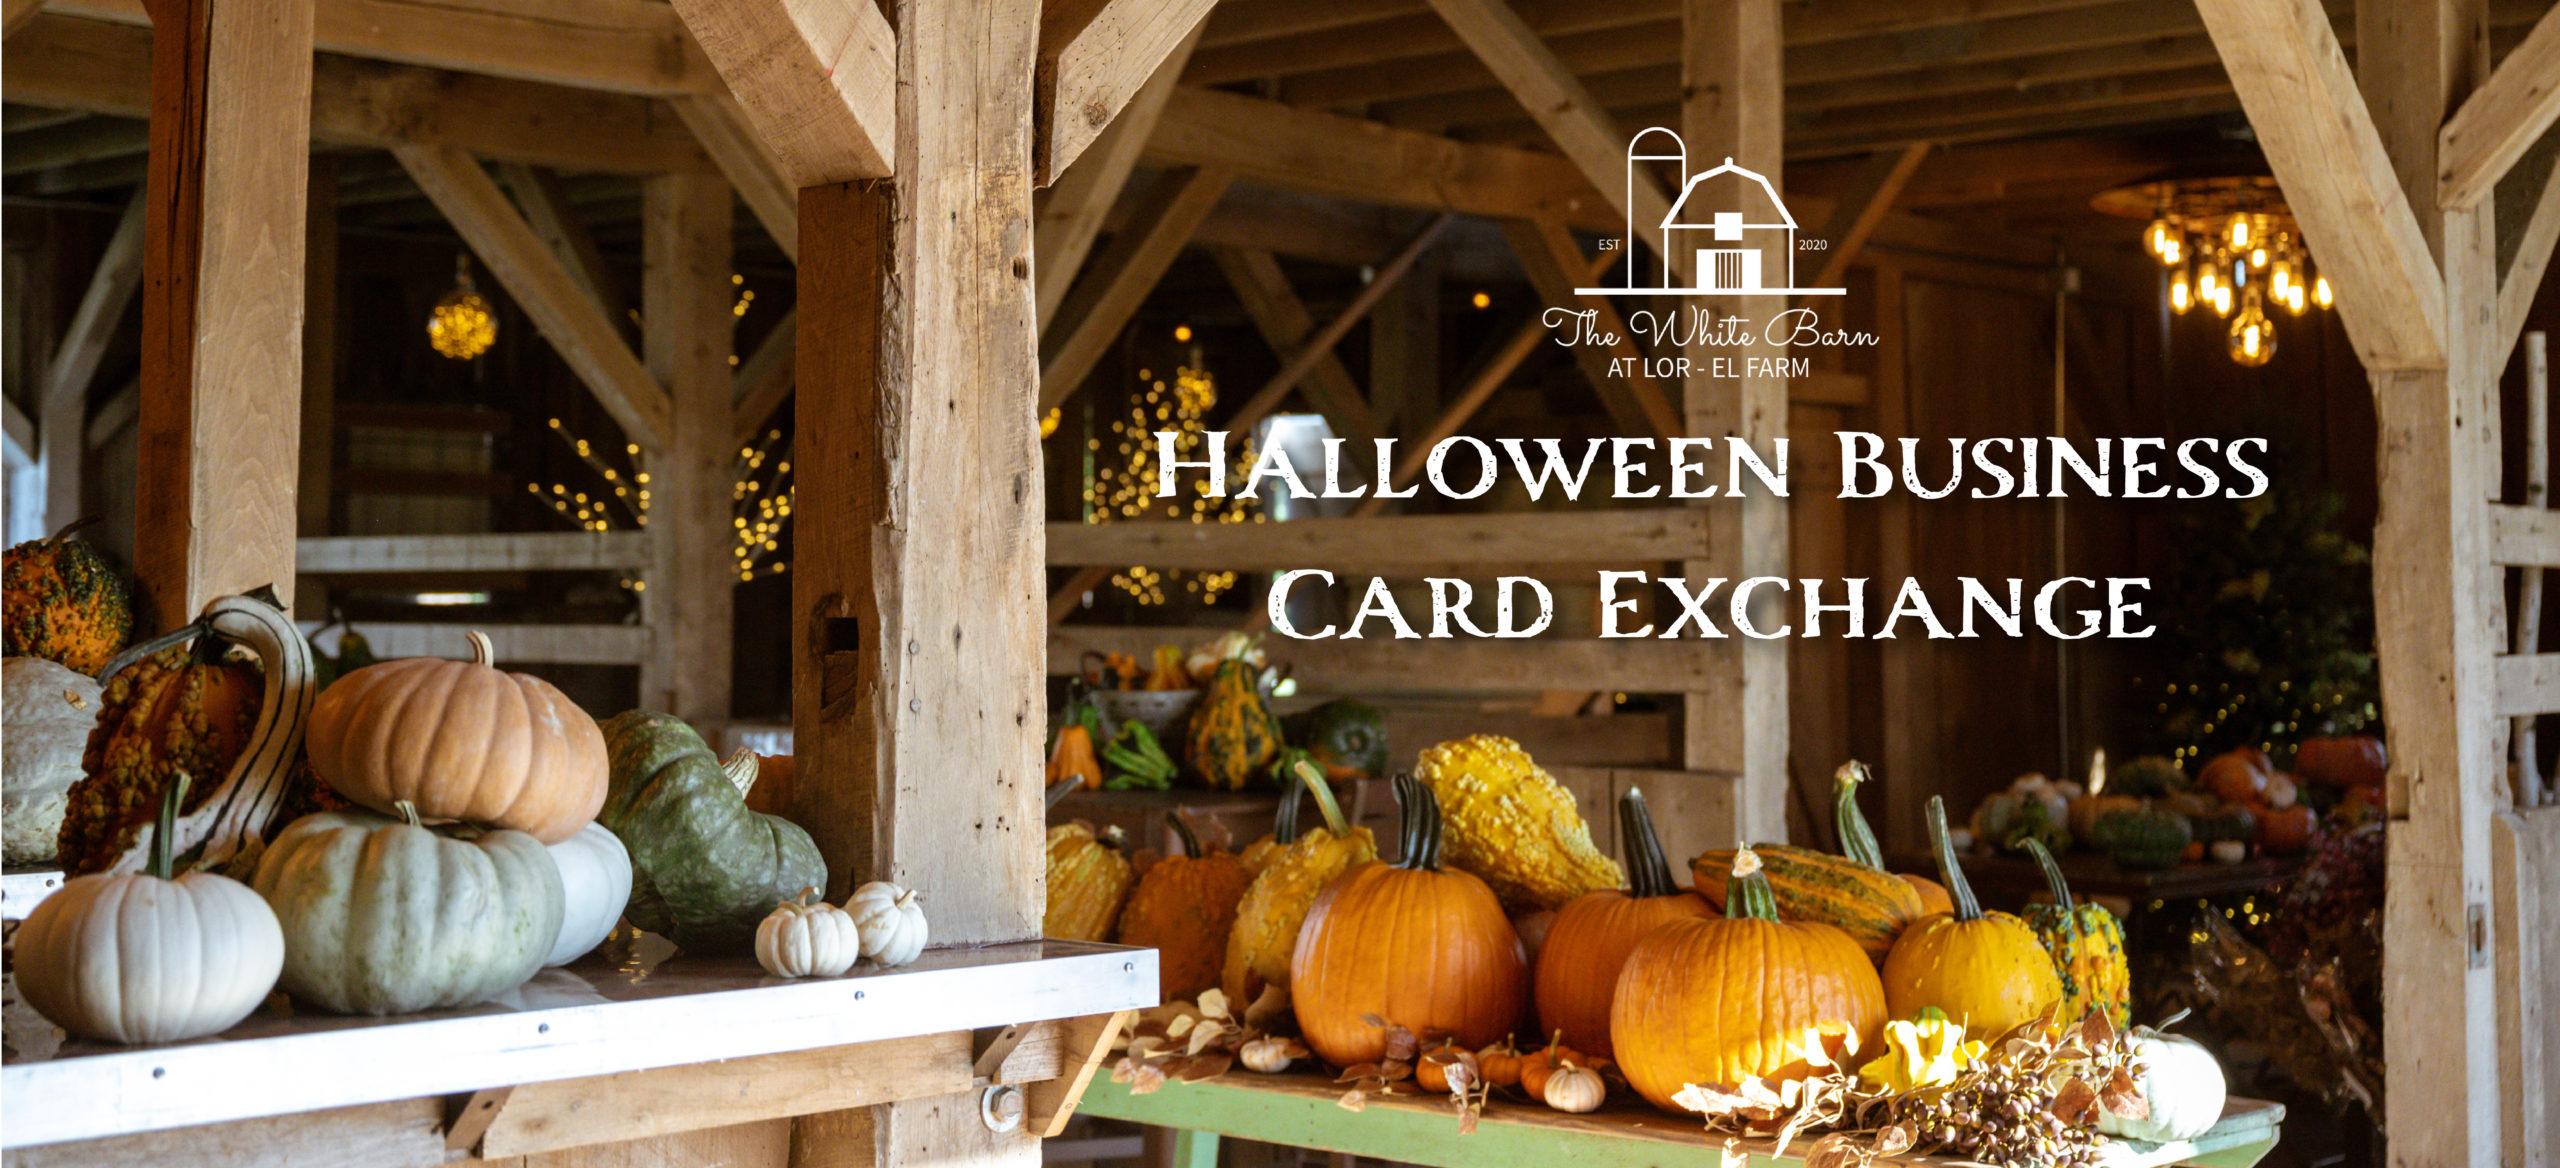 Halloween Business Card Exchange at The White Barn at Lor-El Farm